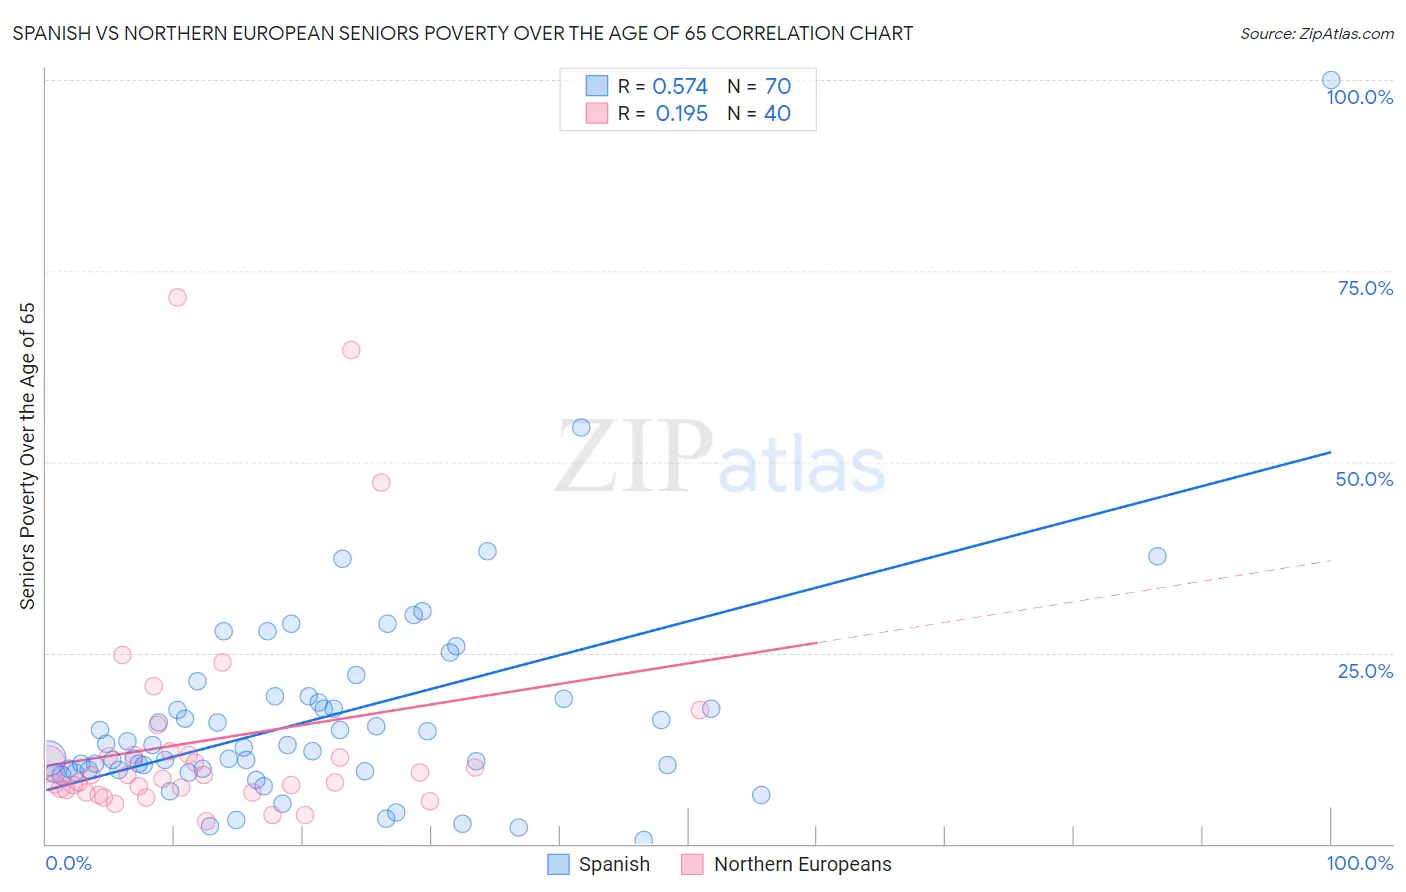 Spanish vs Northern European Seniors Poverty Over the Age of 65